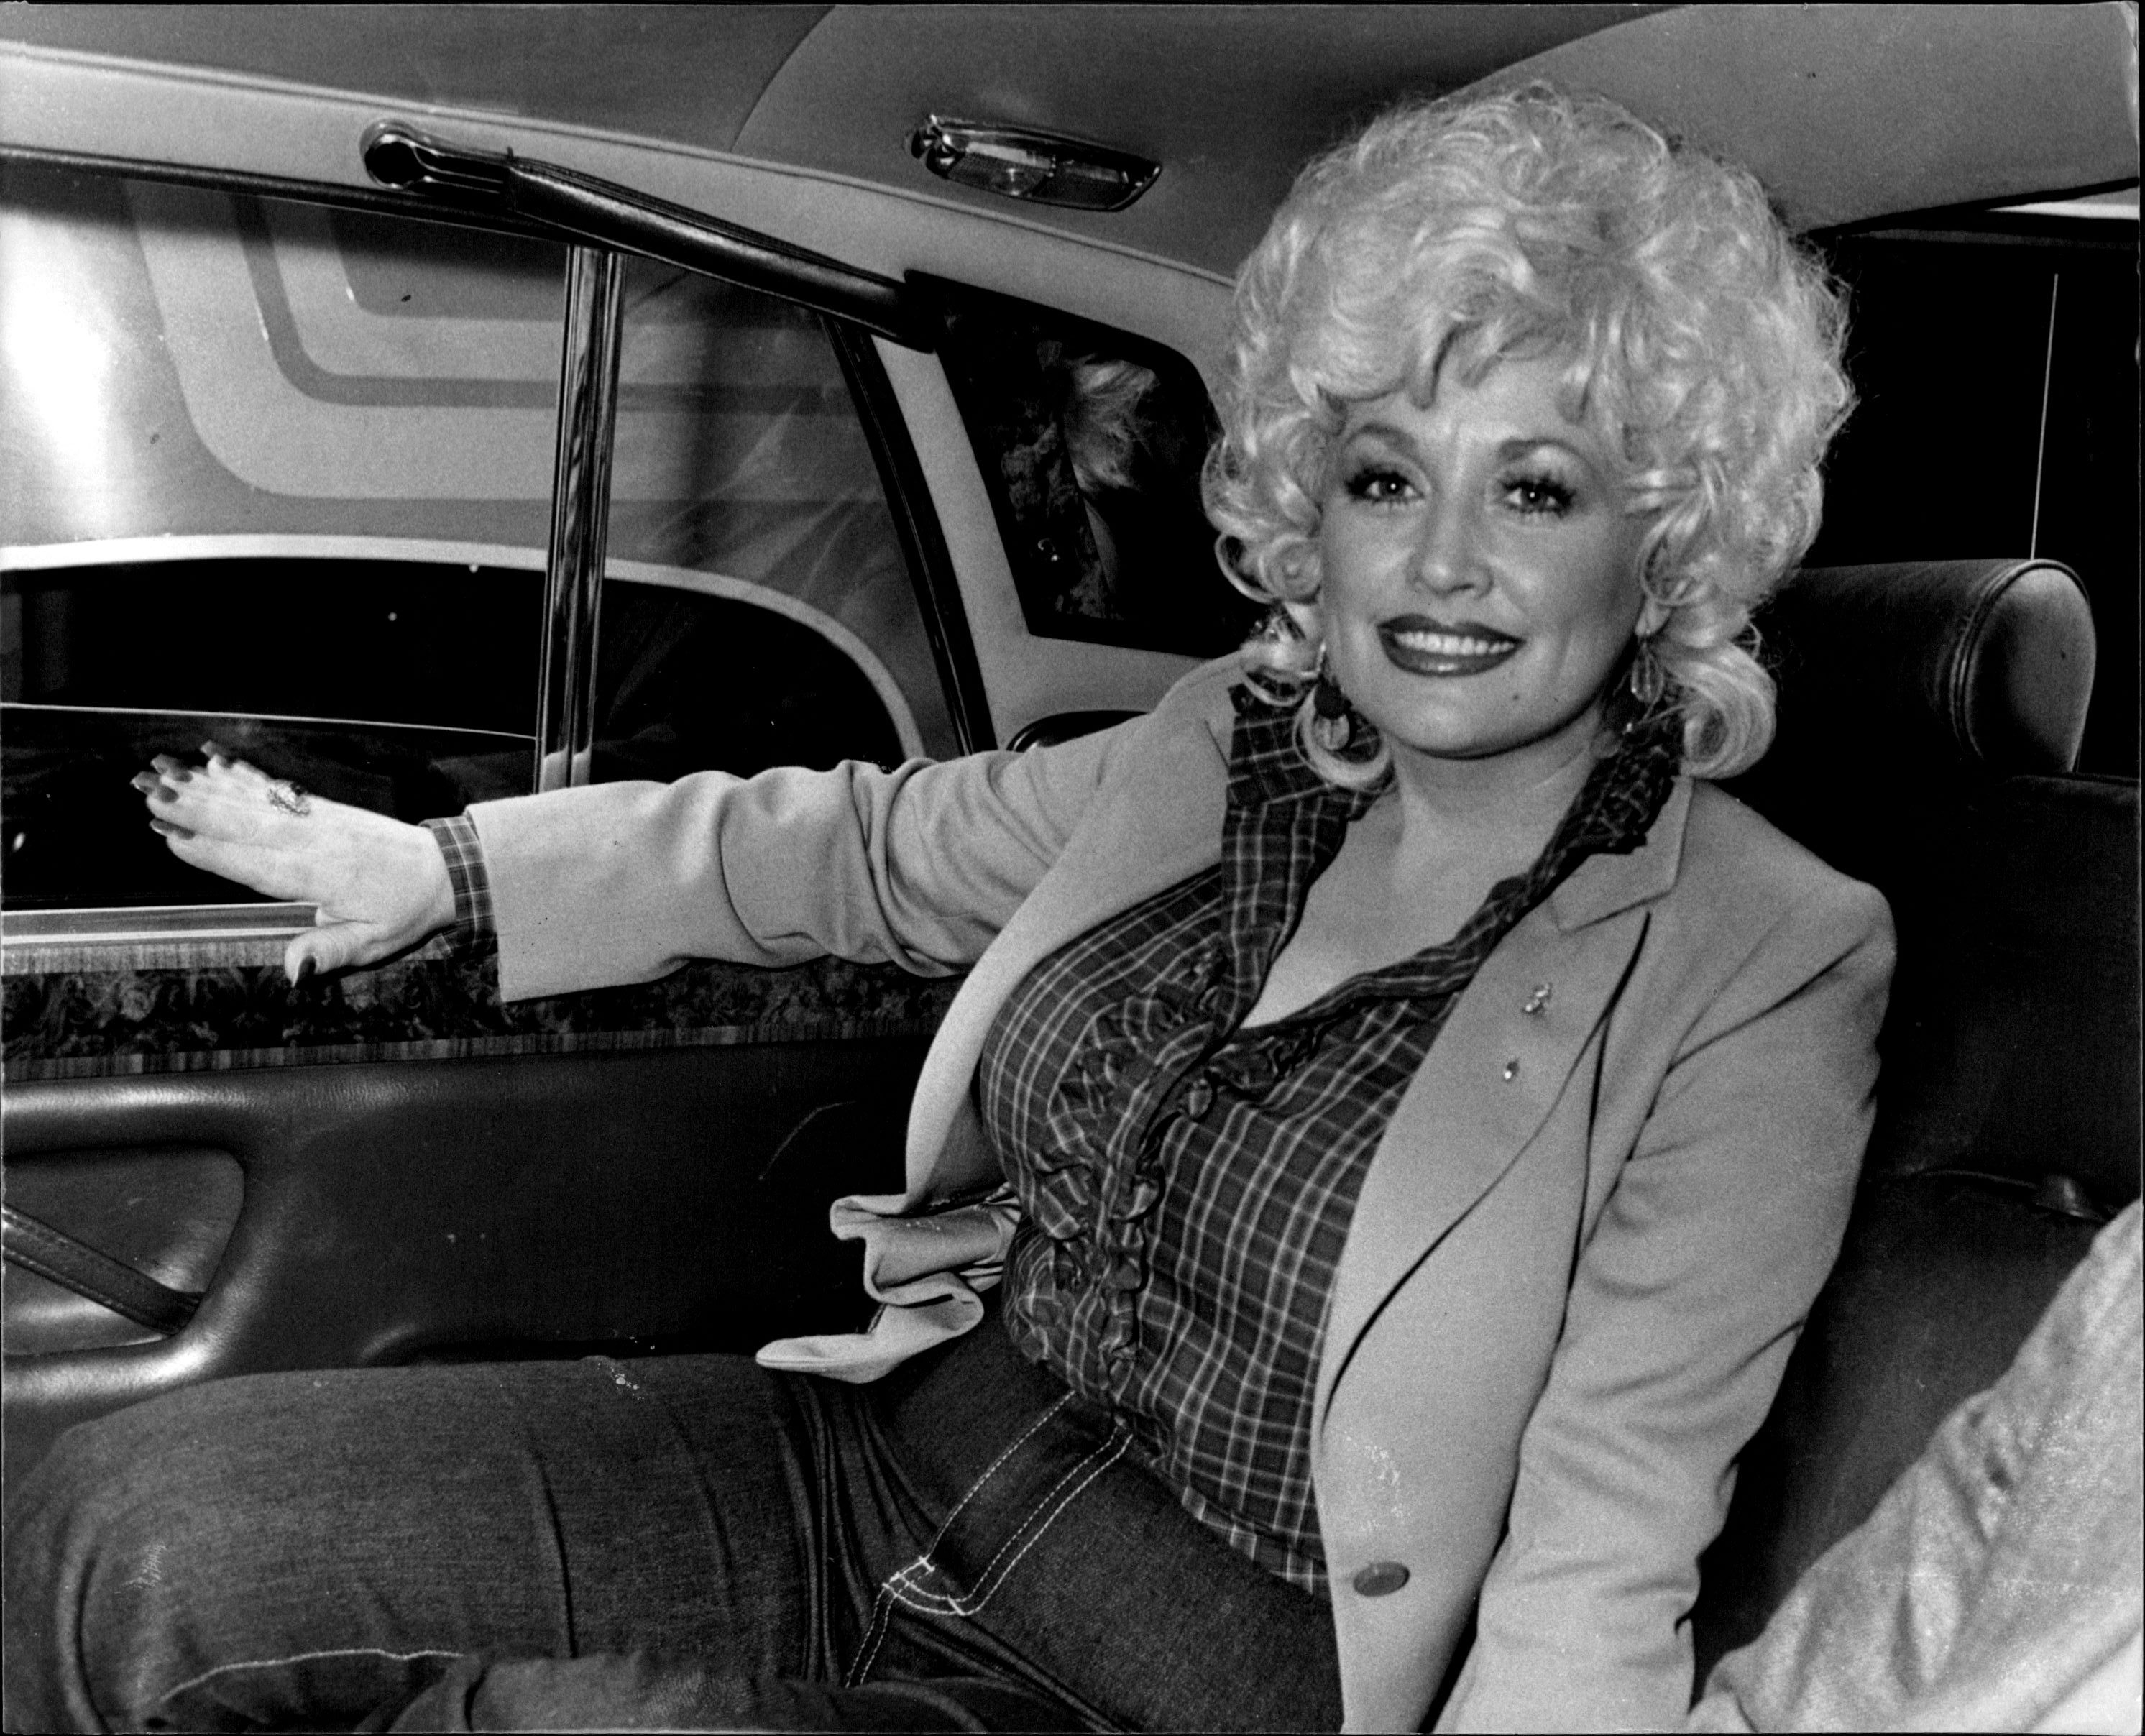 Dolly in a car, smiling and wearing jeans, a plaid blouse, and a jacket